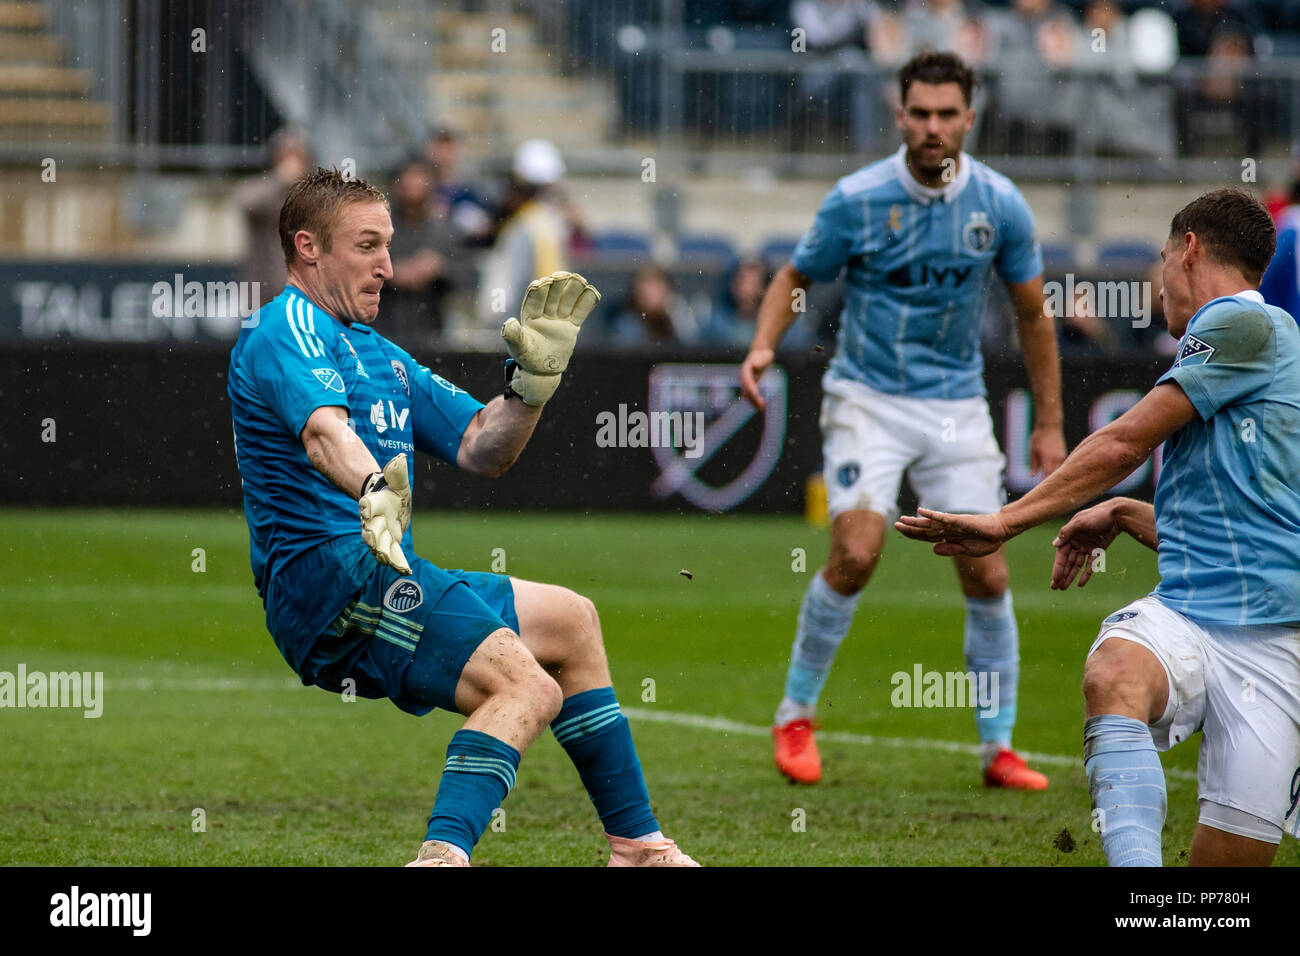 Chester, PA, USA. 23rd Sept, 2018. Sporting goalkeeper Tim Melia (29) sets up for a save in the second half against Philadelphia Union. © Ben Nichols/Alamy Live News Stock Photo